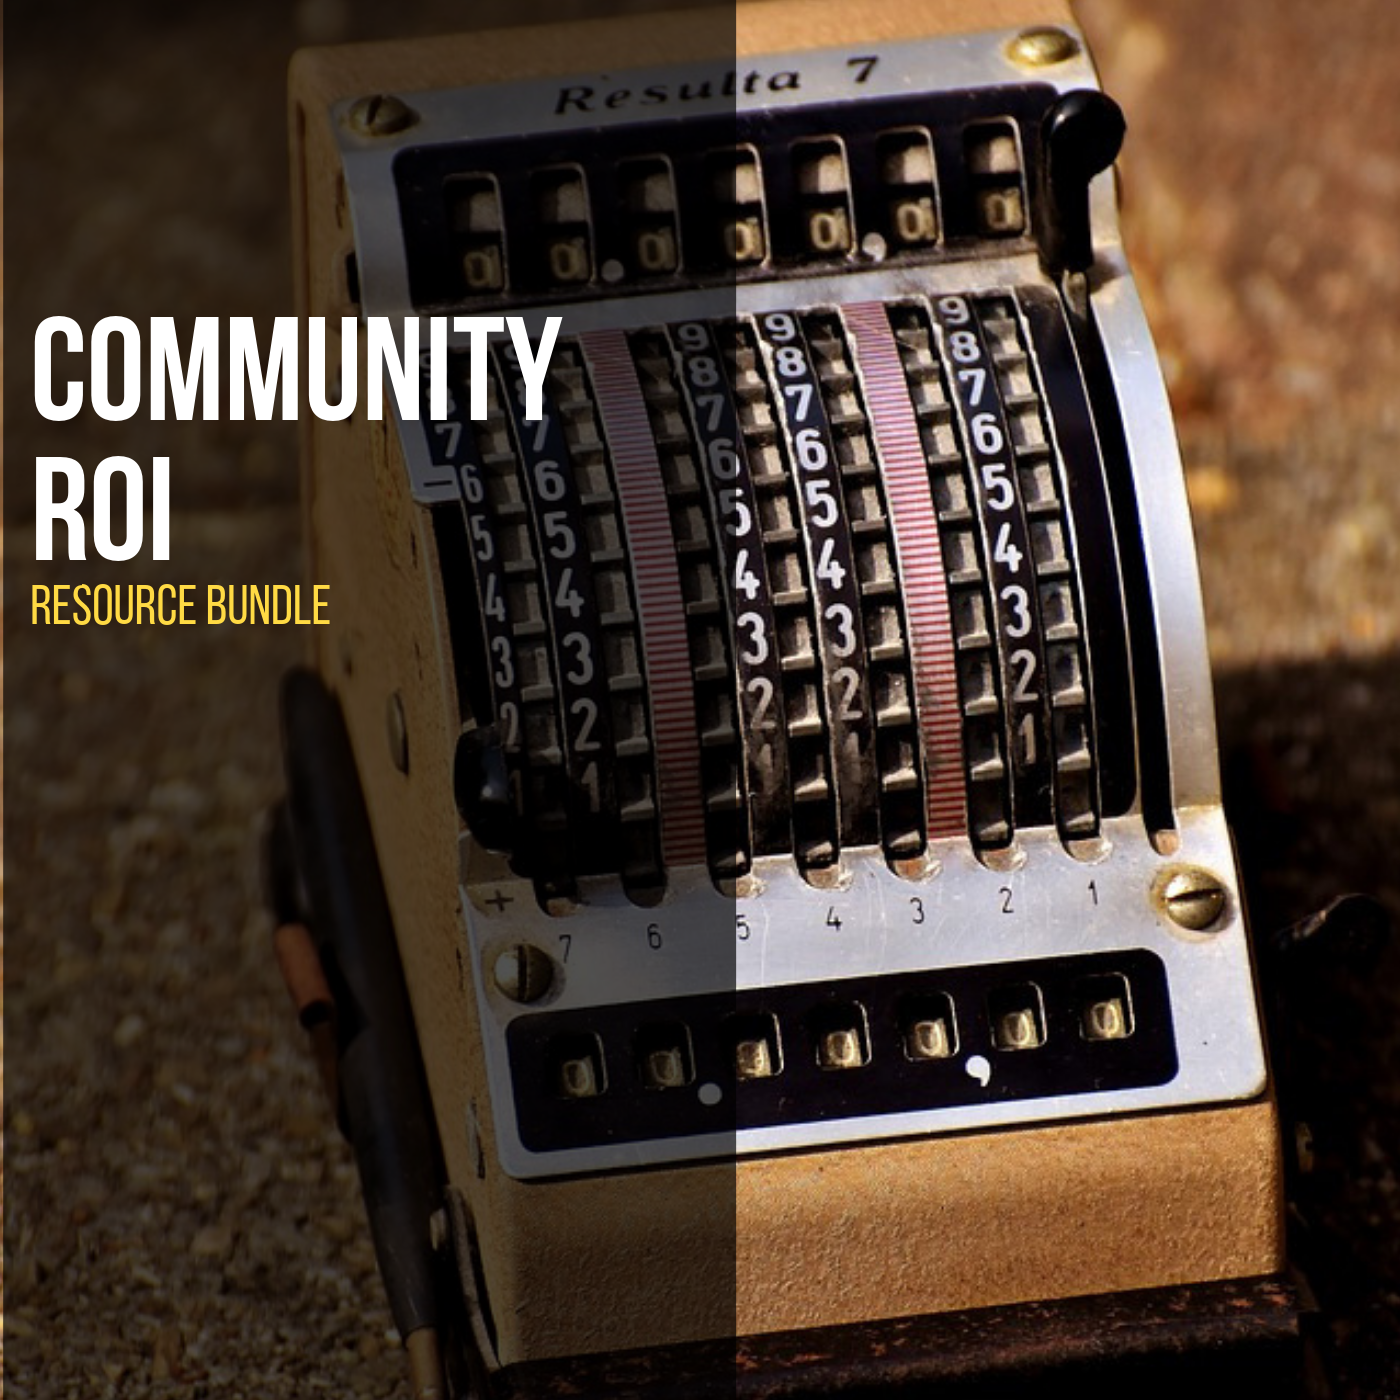 How to calculate community ROI